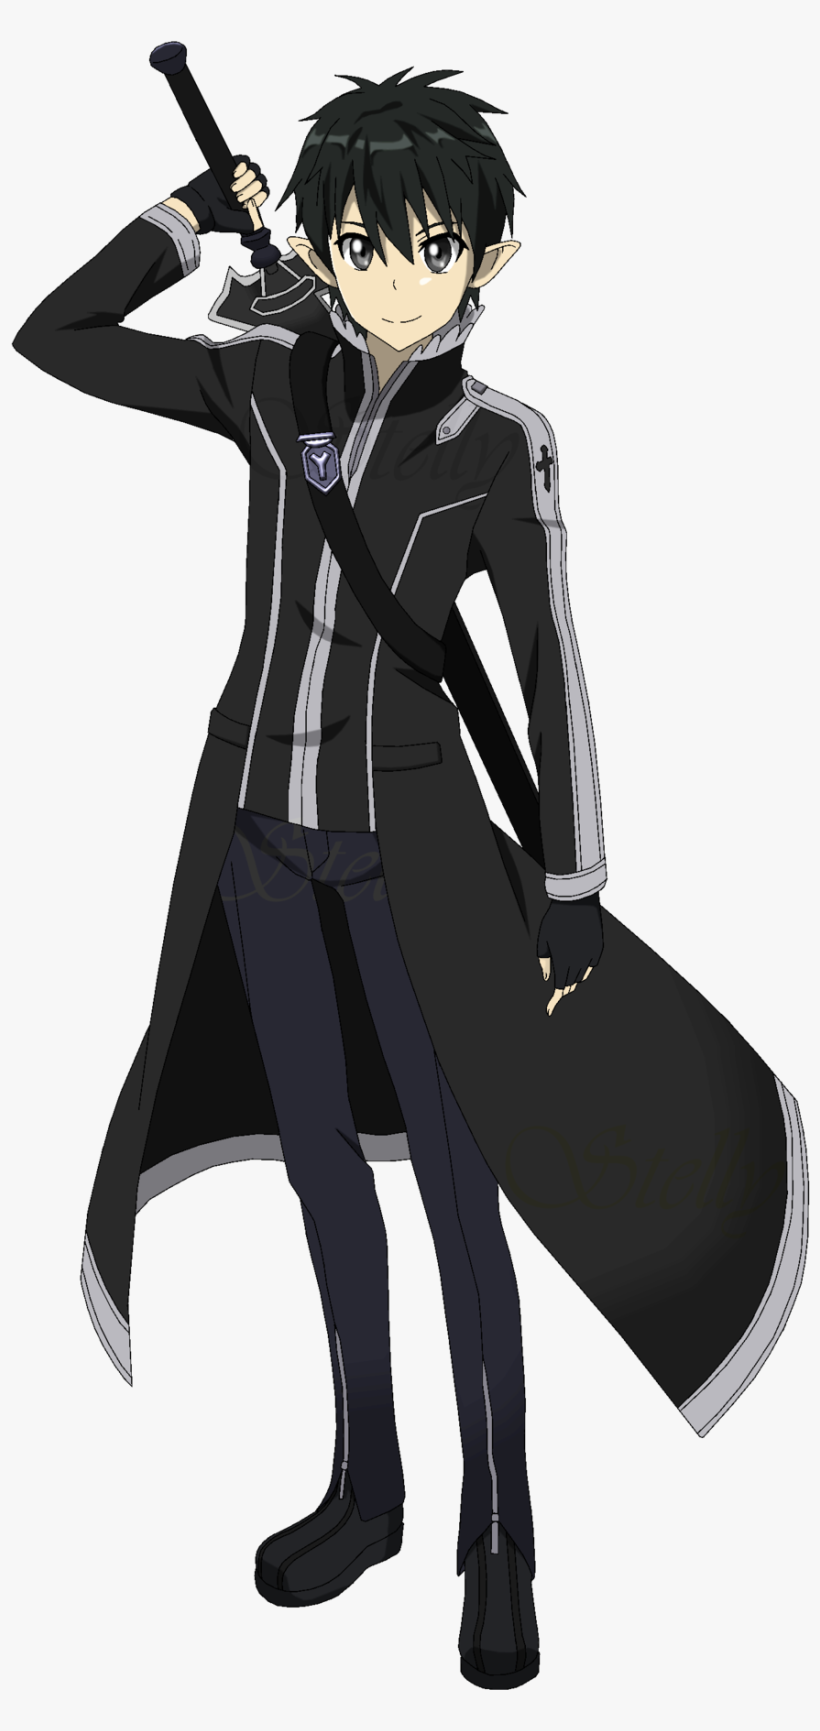 Another Character Requiring A Long, Black Trench Coat - Sword Art Online Alo Kirito, transparent png #8472928